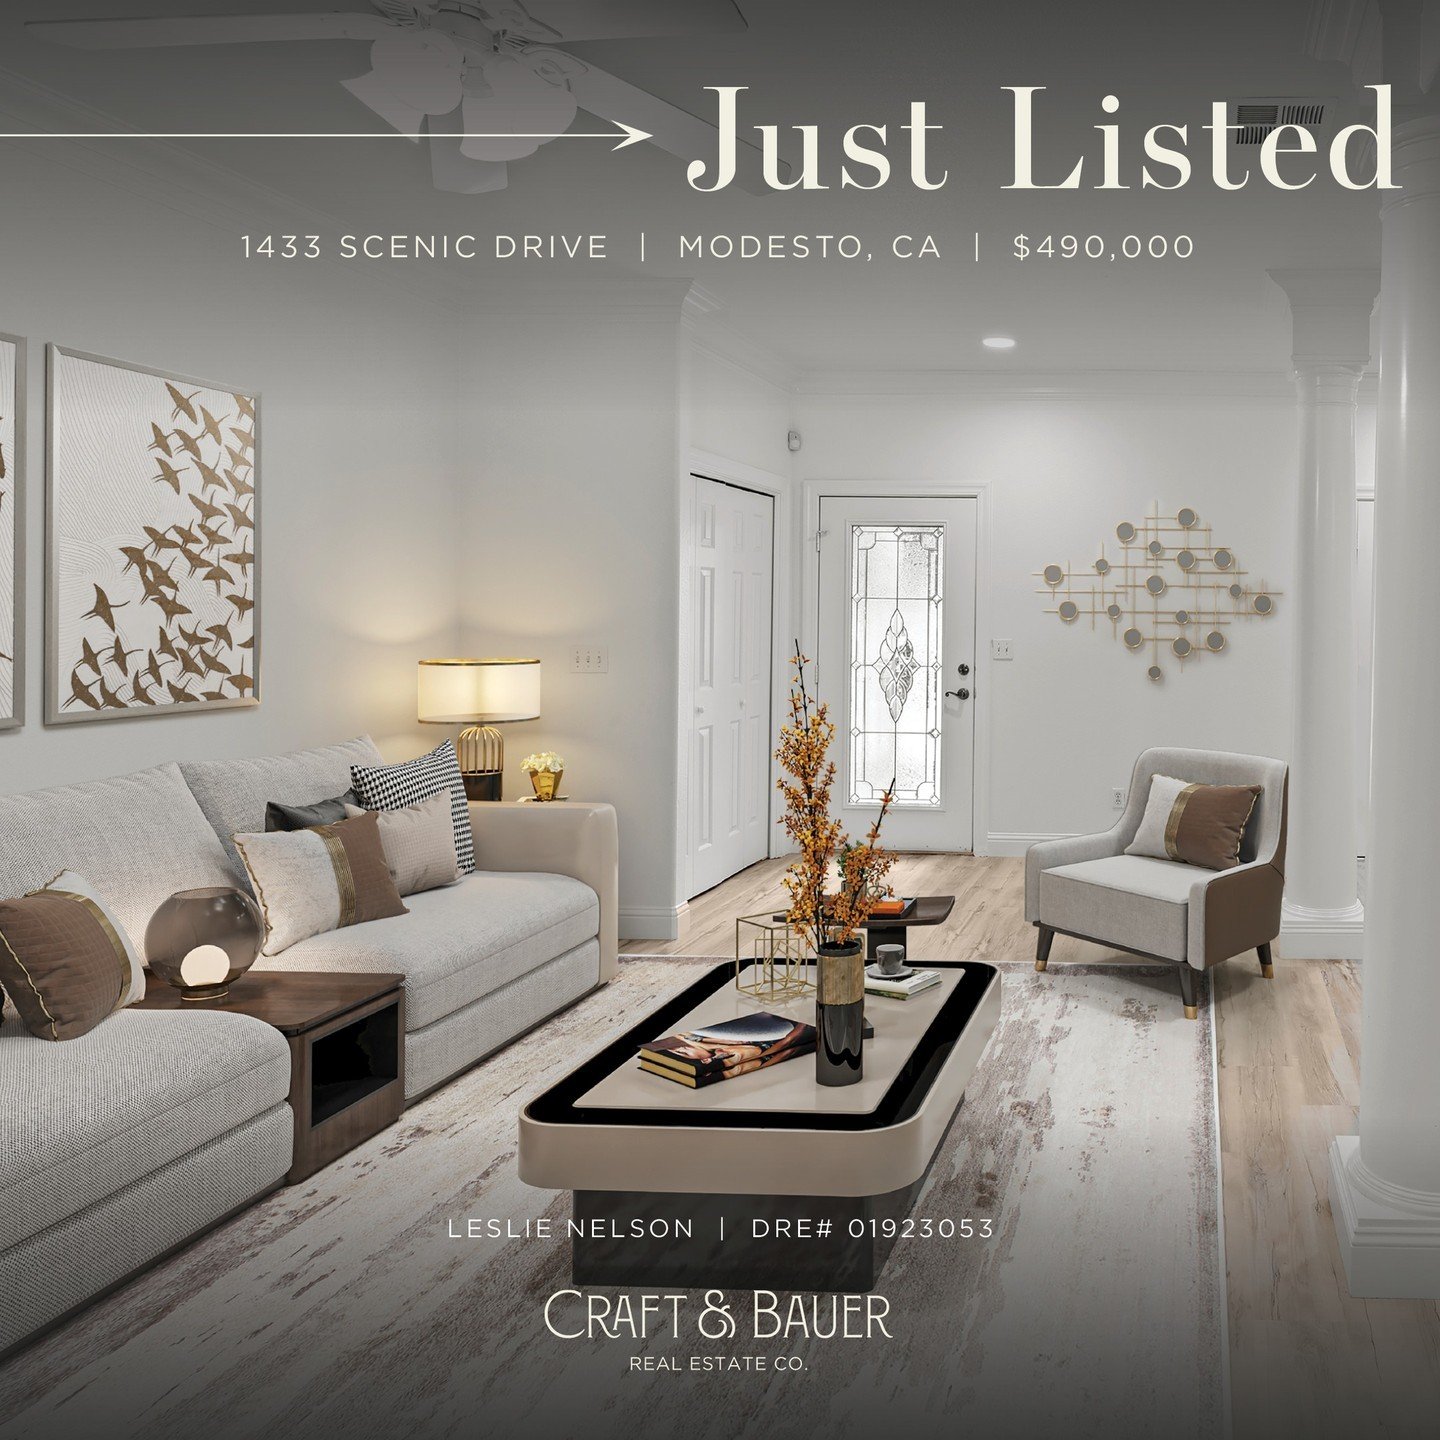 JUST LISTED 👉 If you&rsquo;ve been wanting to grow your investment portfolio, these properties ⁠offer a lot of potential!⁠
⁠
🏡 1433 Scenic Drive⁠
📍 Modesto, CA⁠
💰 $490,000⁠
⁠
🏡 1437 Scenic Drive⁠
📍 Modesto, CA⁠
💰 $475,000⁠
⁠
🏡 1441 Scenic Dri